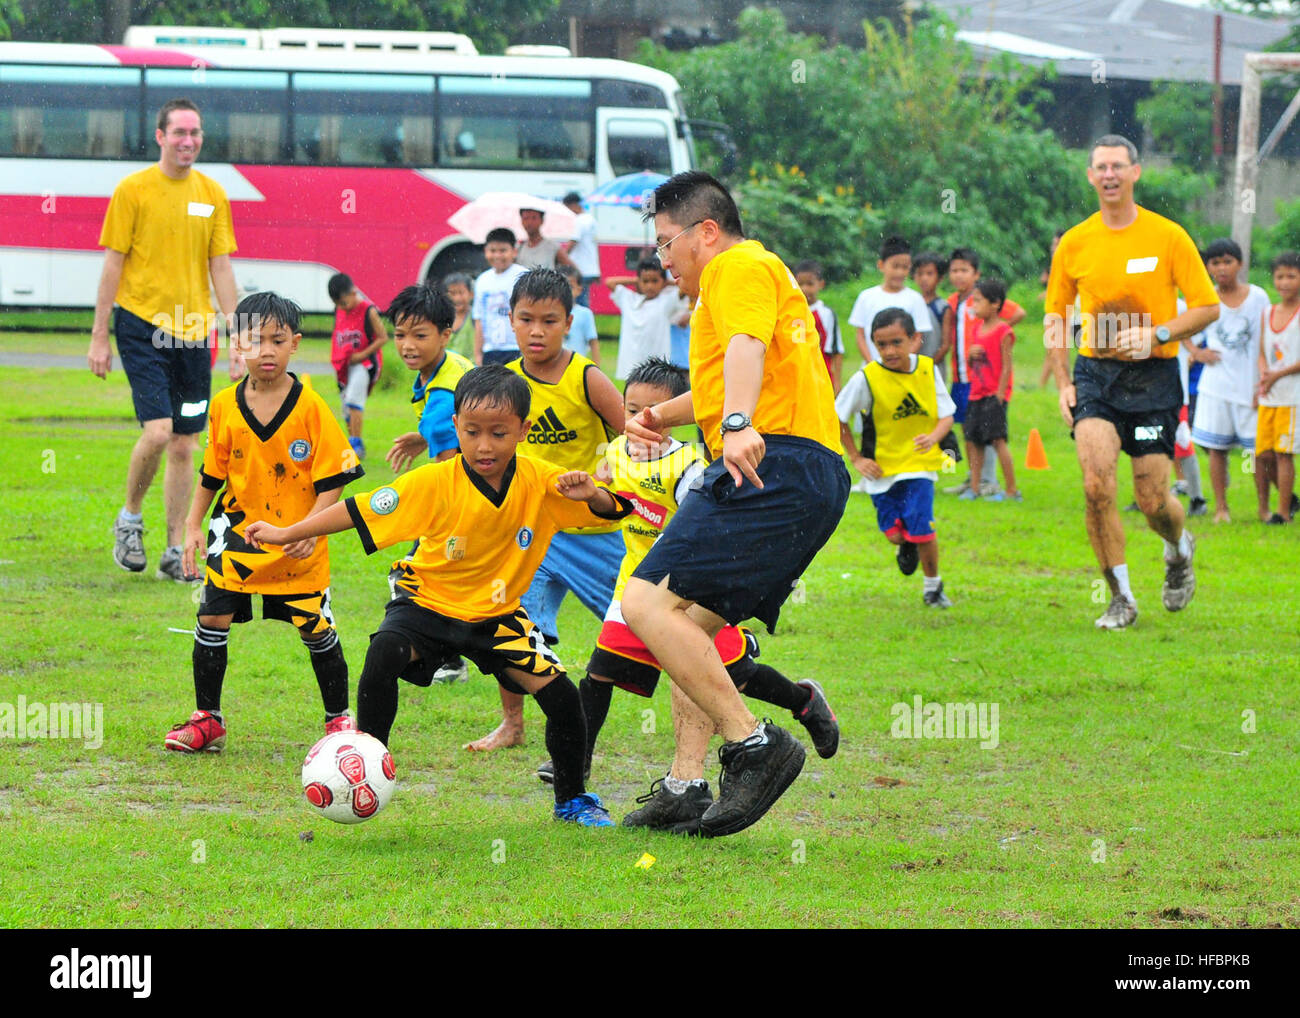 110730-N-BT122-037 OLONGAPO CITY, Philippines (July 30, 2011) Information Systems Technician 3rd Class Chi-Ming Chan, assigned to the submarine tender USS Frank Cable (AS 40), plays soccer against the Olongapo youth team during a community service event. Frank Cable conducts maintenance and support of submarines and surface vessels deployed in the U.S. 7th Fleet area of responsibility.  (U.S. Navy photo by Mass Communication Specialist 1st Class Melvin Nobeza/REleased)  - Official U.S. Navy Imagery - Sailor plays soccer against the Olongapo youth team. Stock Photo